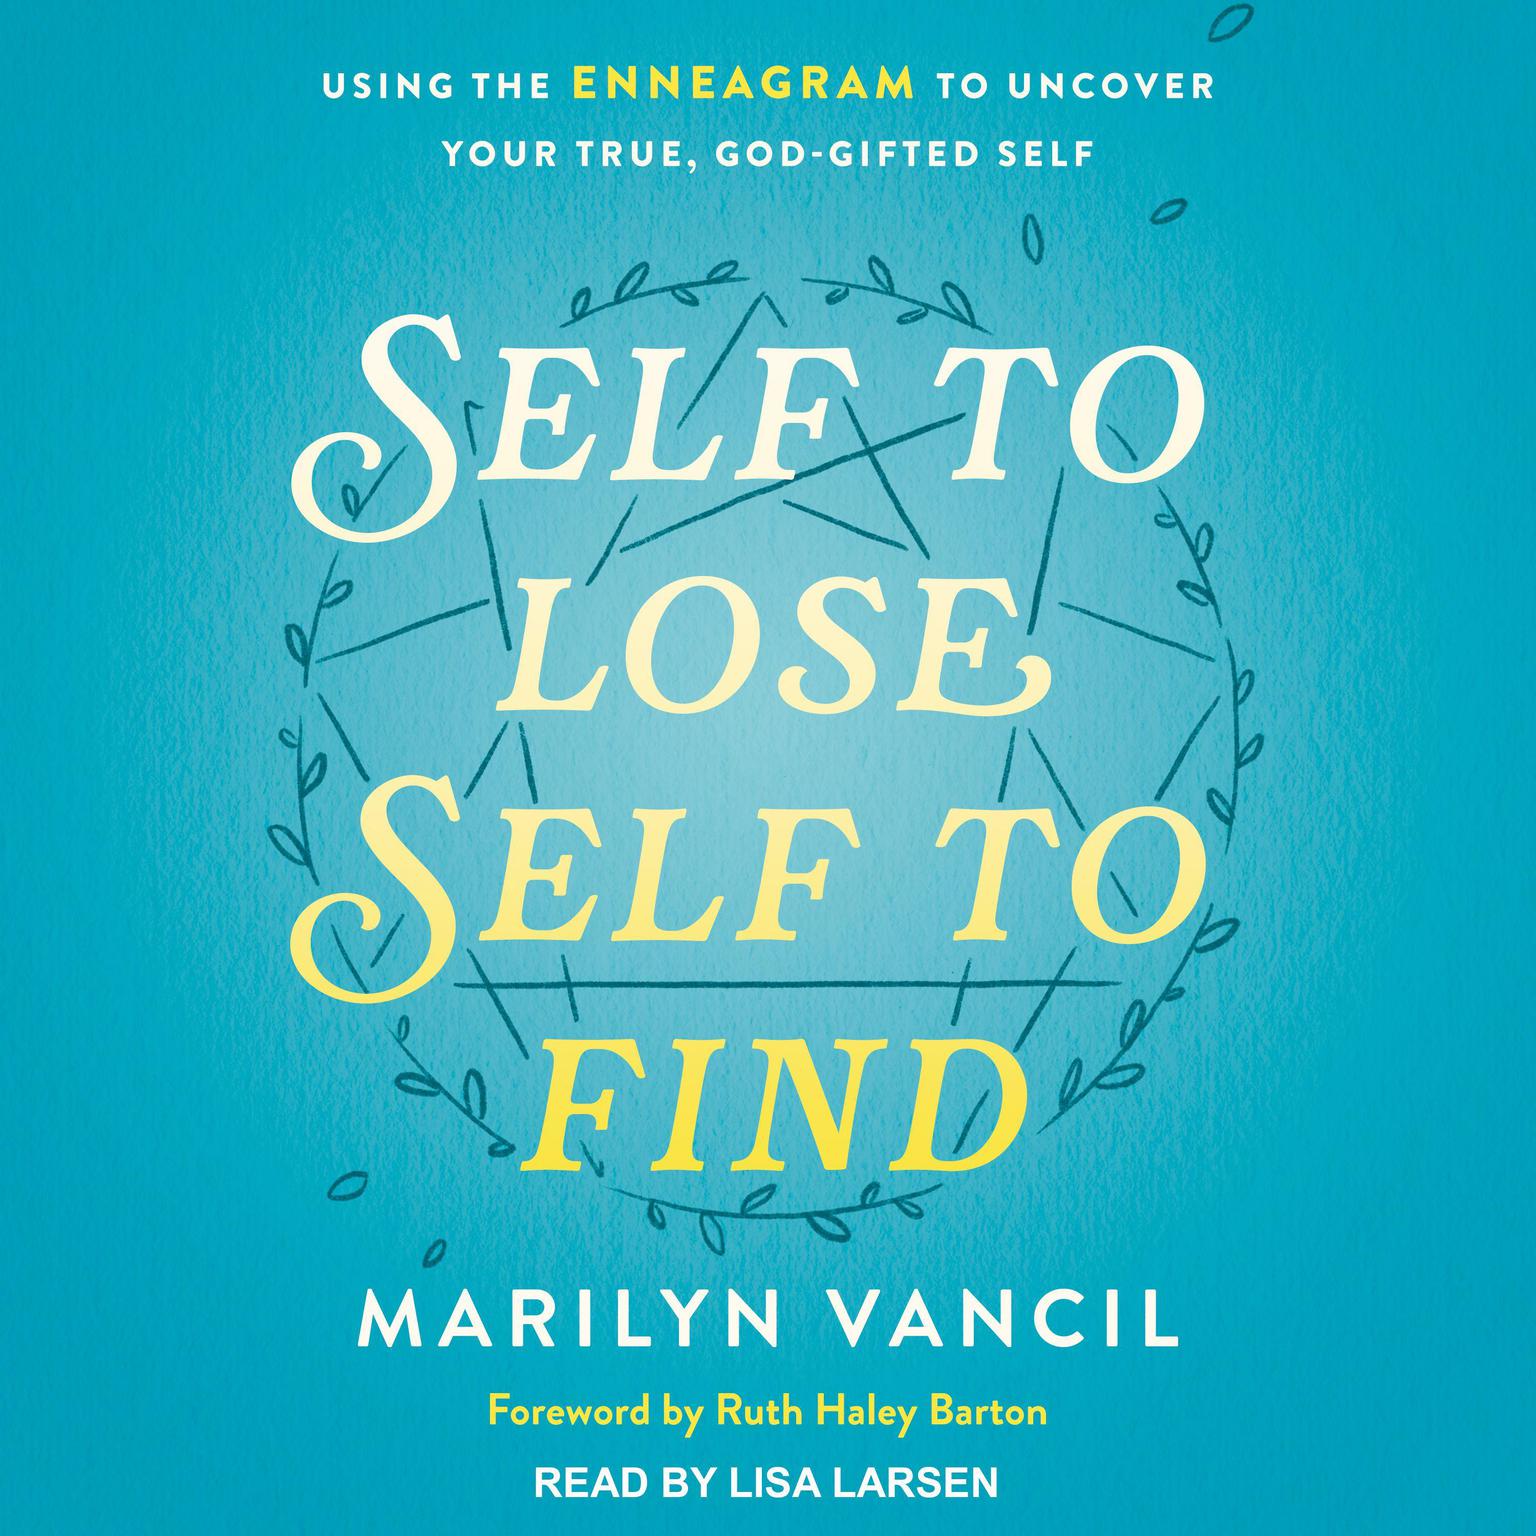 Self to Lose, Self to Find (Revised and Updated): Using the Enneagram to Uncover Your True, God-Gifted Self Audiobook, by Marilyn Vancil